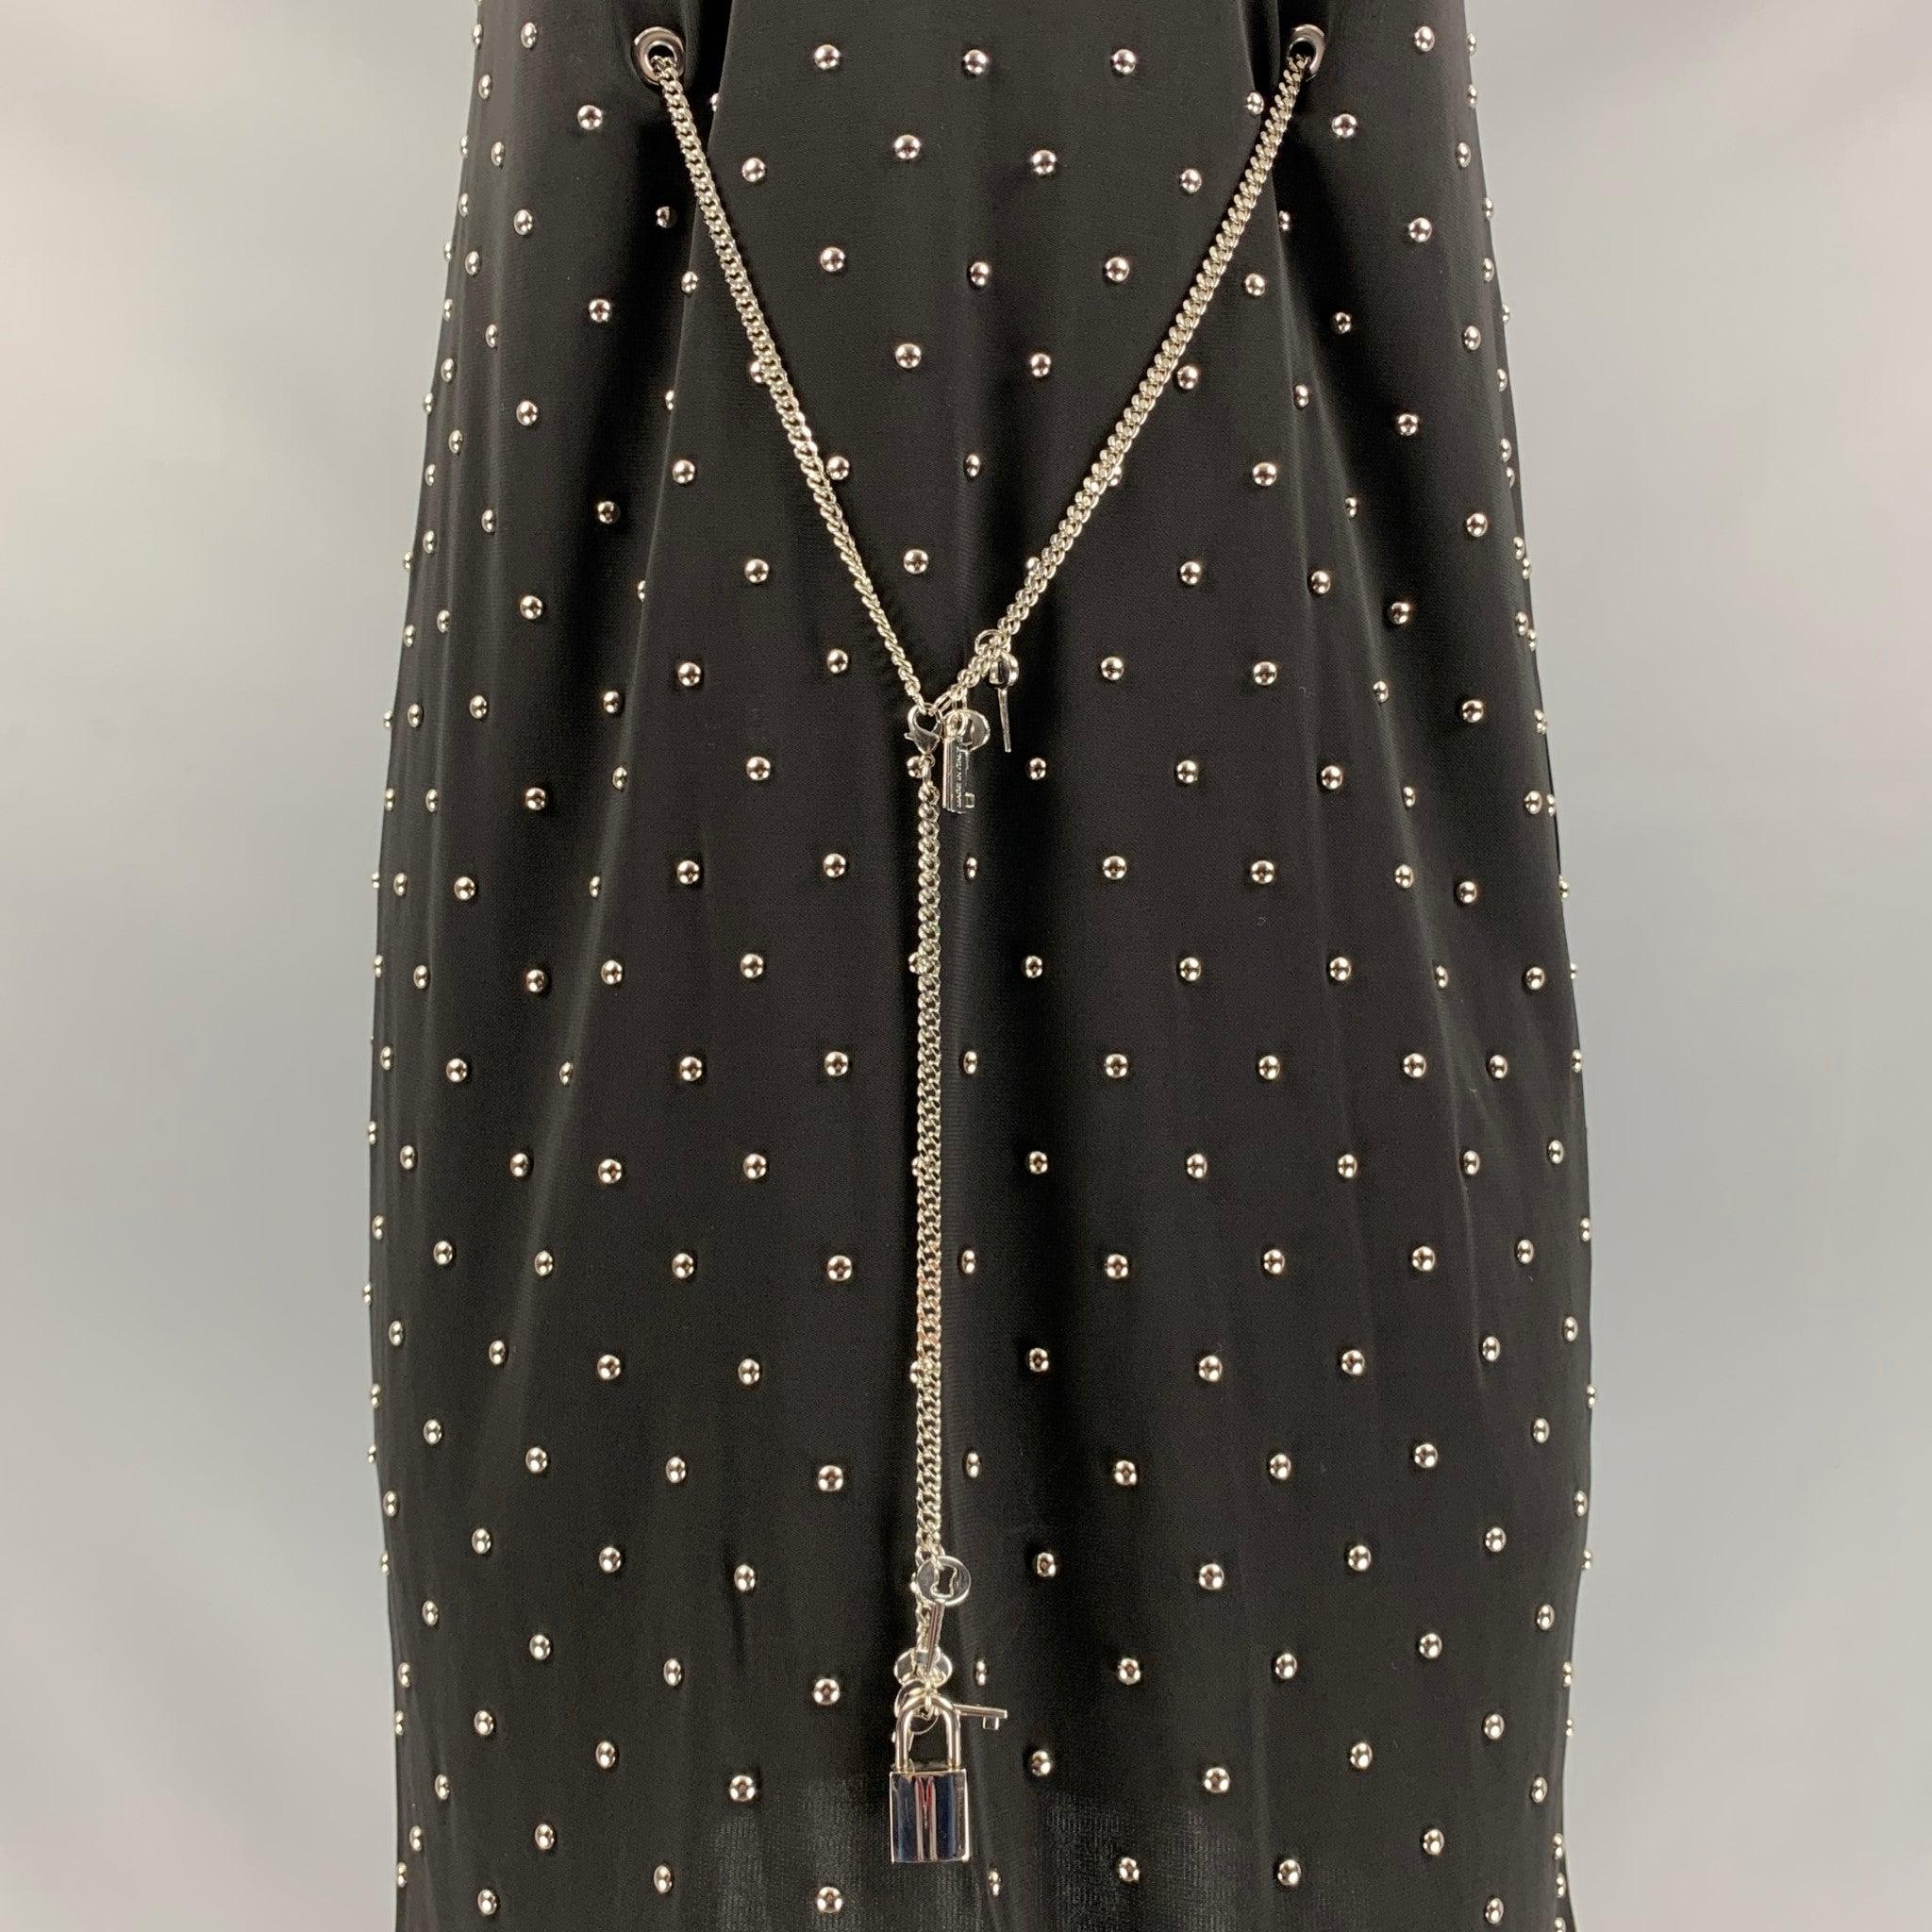 MOSCHINO cheap and chic sleeveless below knee dress comes in a black polyester, full lined featuring studded detail and metal belt. Made in Italy.
Excellent Pre-Owned Condition.  

Marked:   40 IT 

Measurements: 
 
Shoulder: 13 inBust: 36 inWaist: